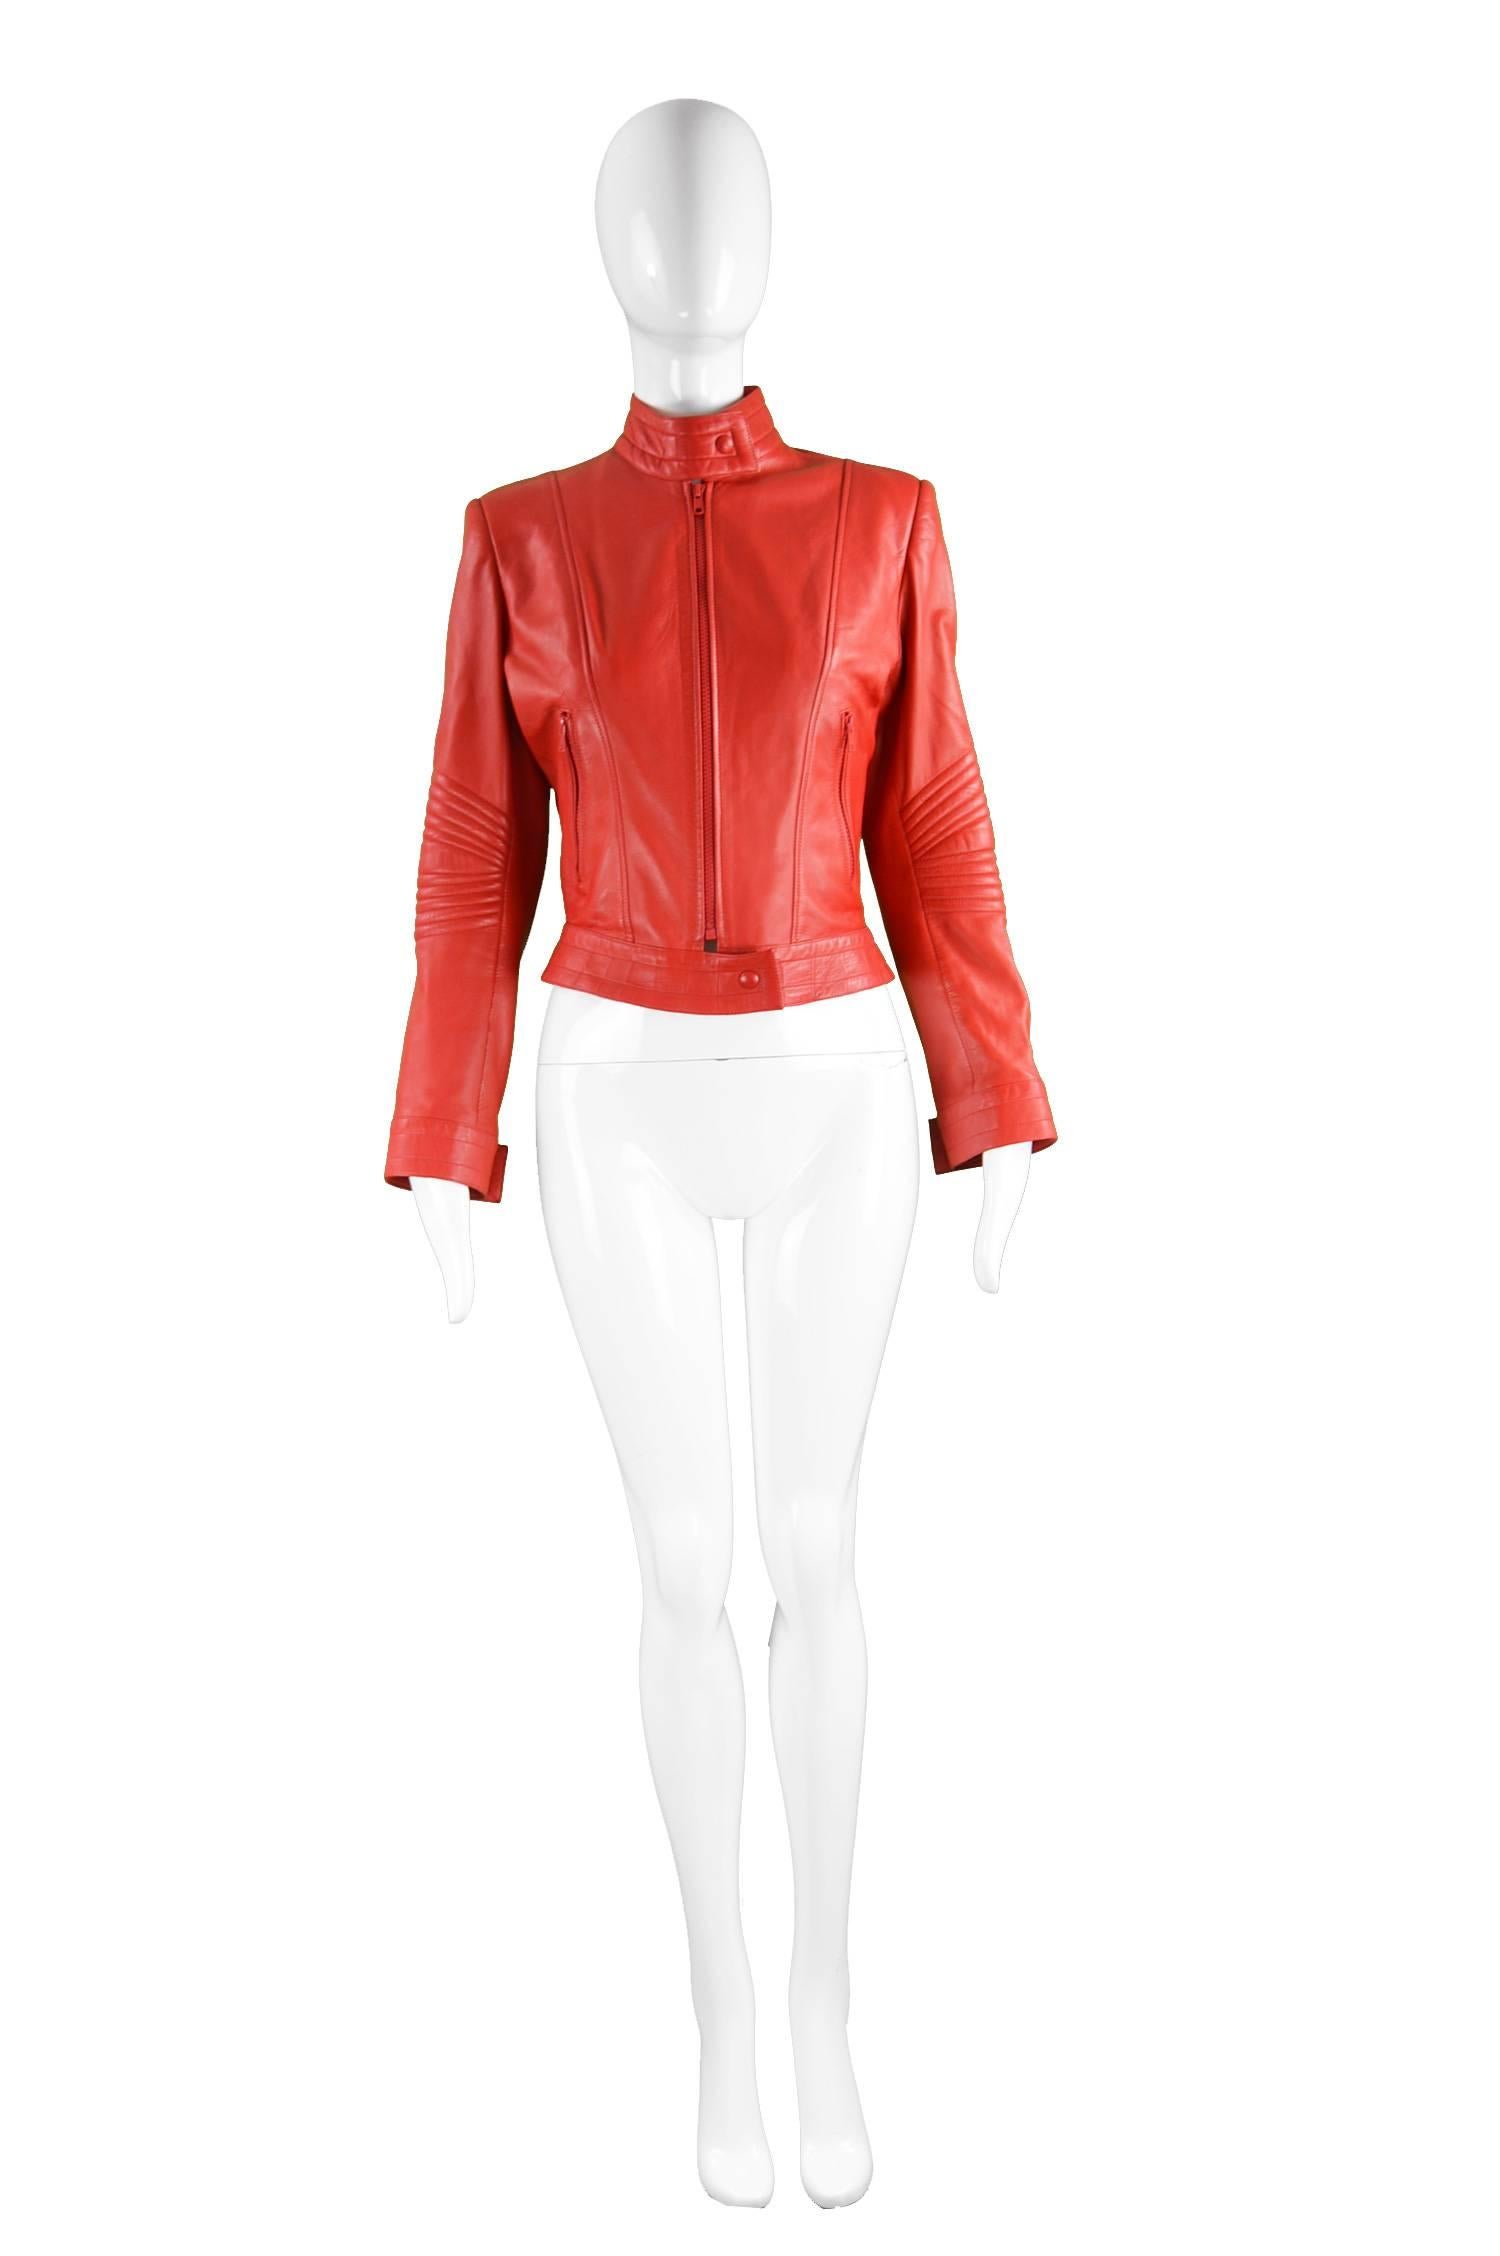 Jean Claude Jitrois Bright Red Café Racer Style Lambskin Leather Jacket 

Size: Marked 38 which is roughly a UK 10 / US 6. 
Bust - up to 38” / 96cm has a loose fit on bust like most leather jackets
Waist - 28” / 71cm
Length (Shoulder to Hem) - 19” /